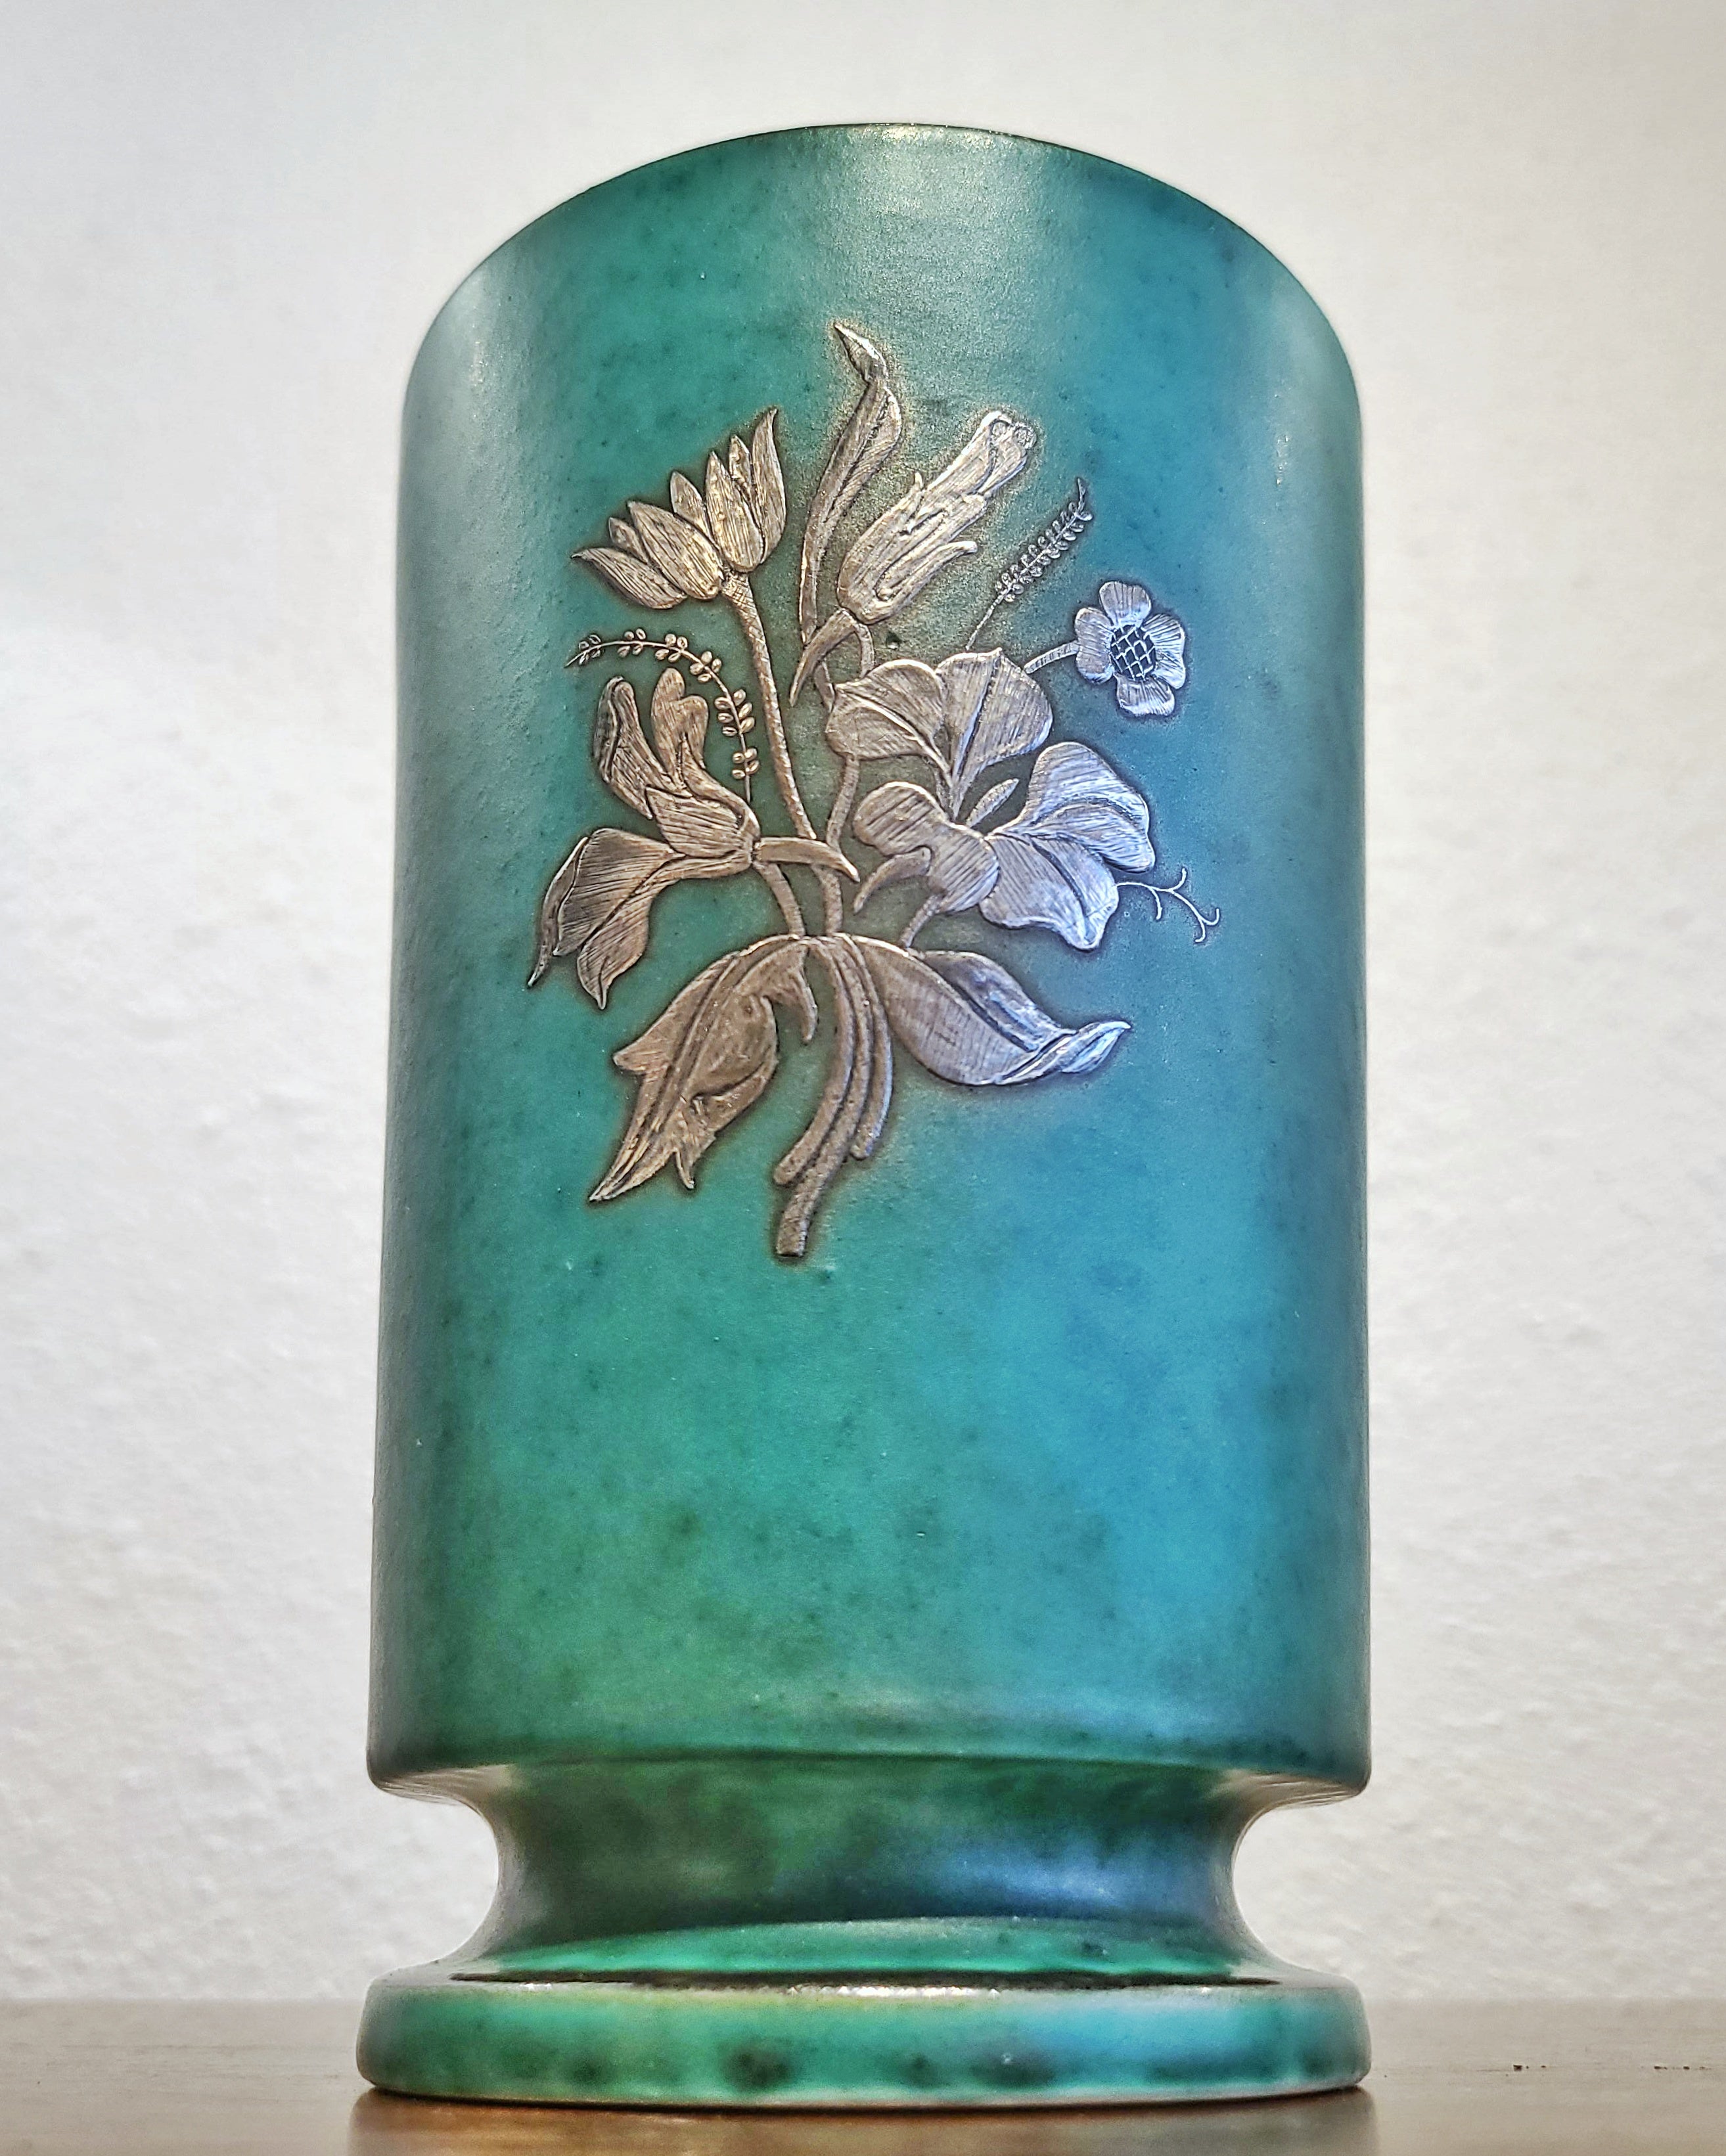 FOOTED 'ARGENTA' VASE WITH SILVER OVERLAY BY WILHELM KÅGE FOR GUSTAVSBERG